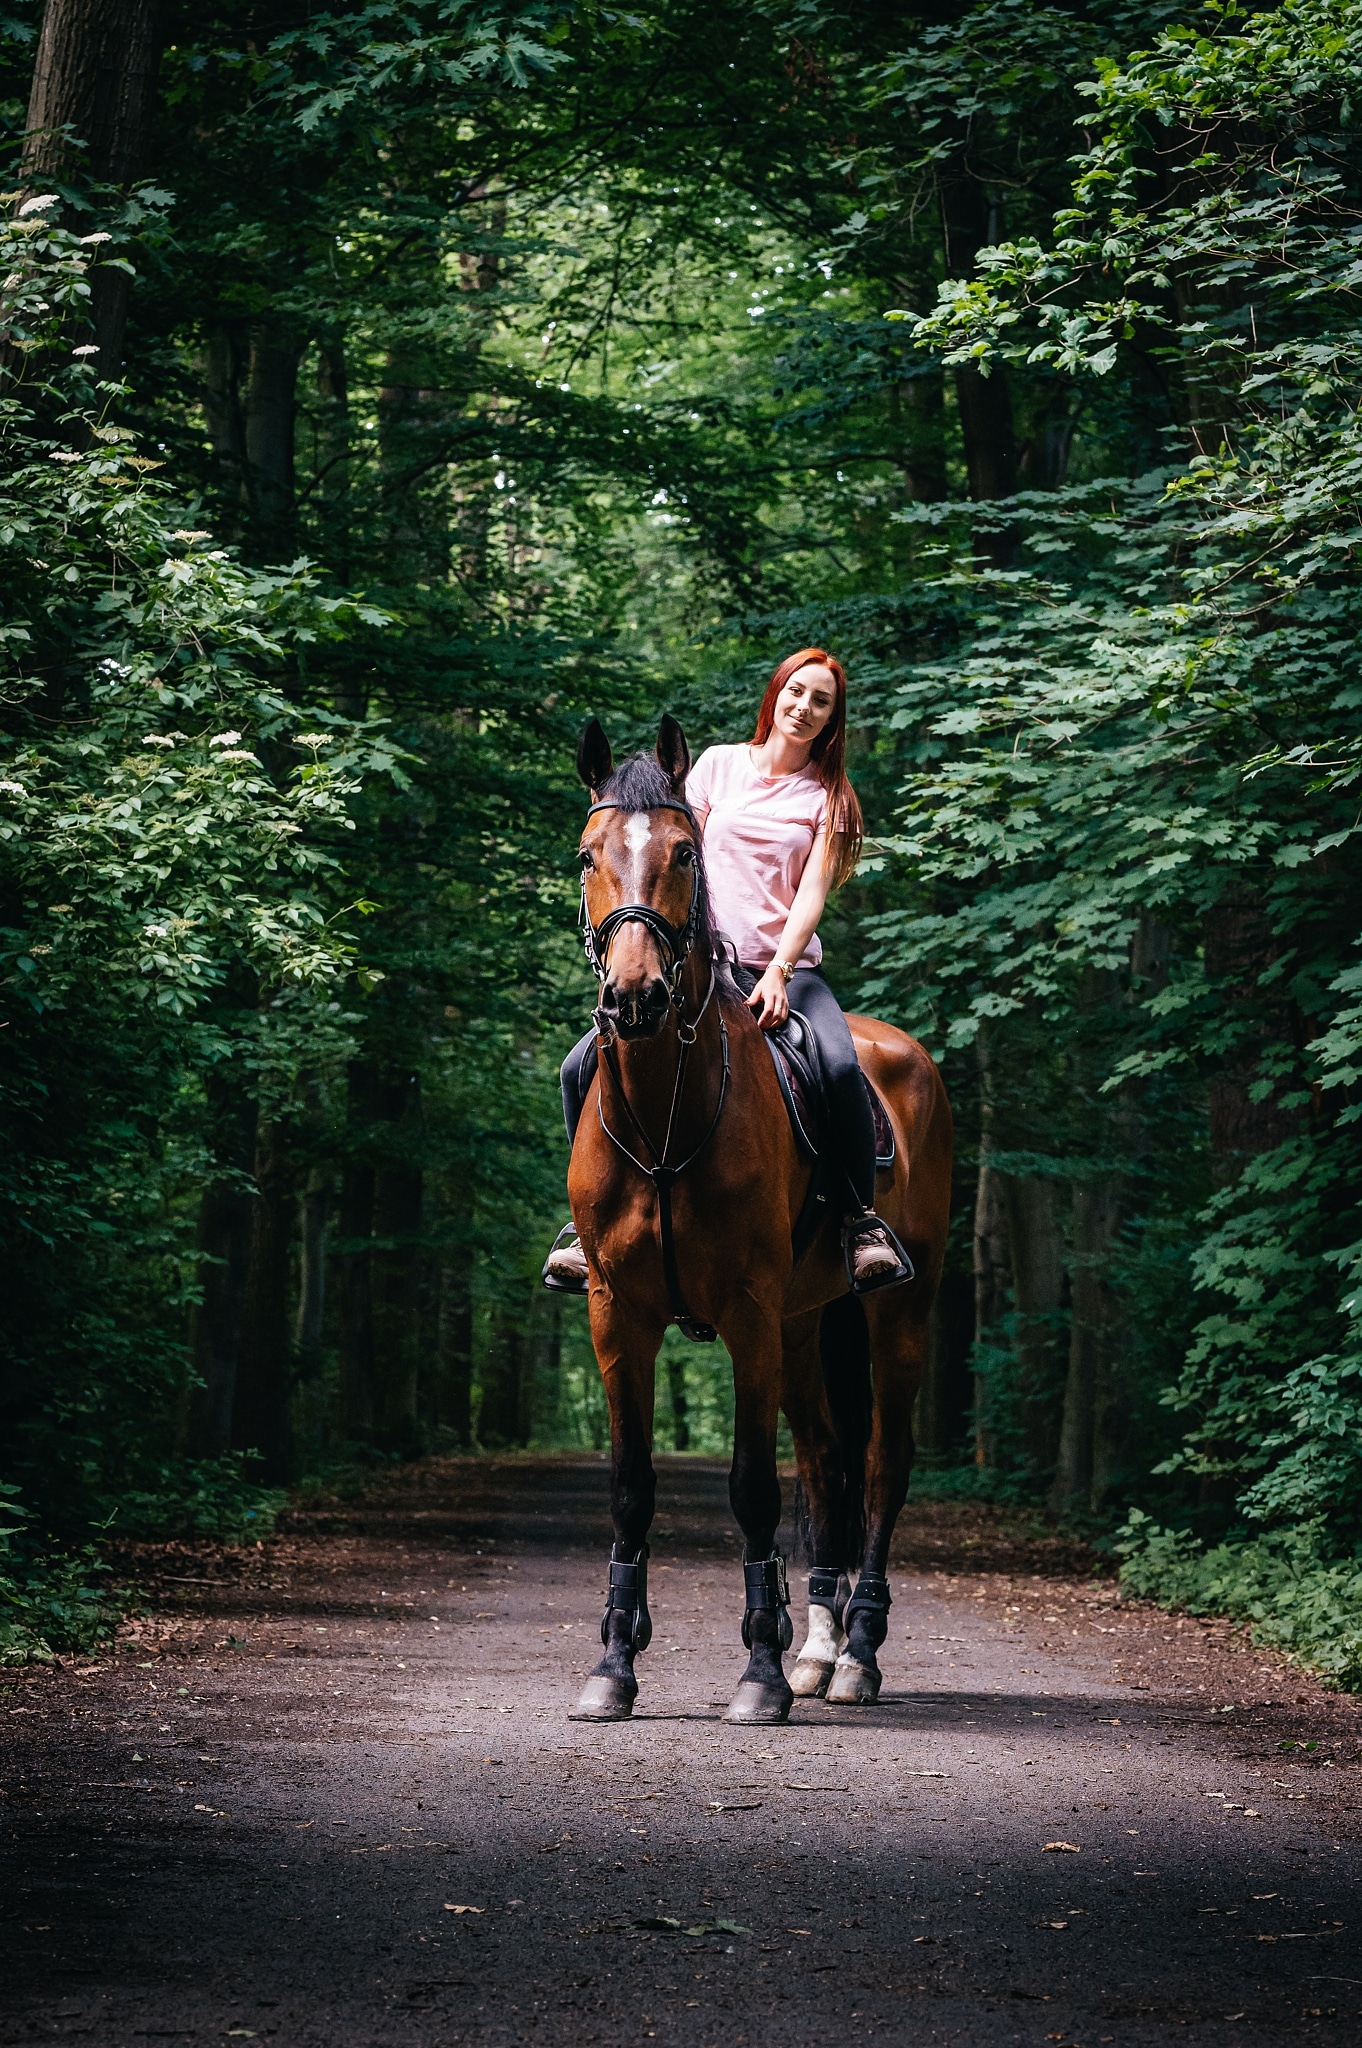 How to Take Portraits with Horses